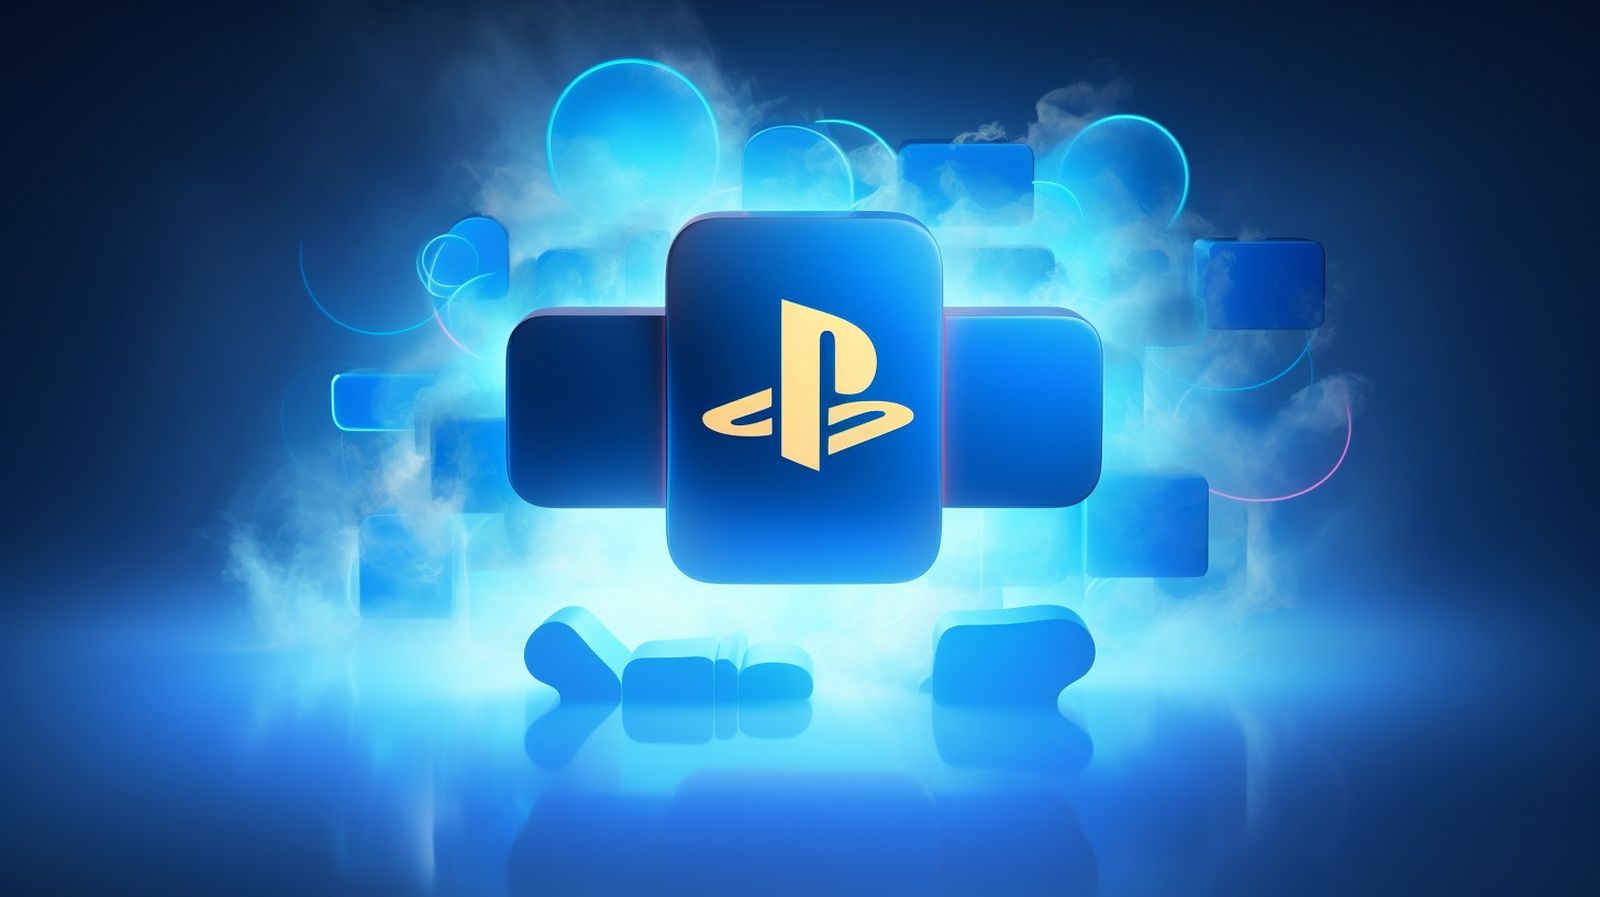 PlayStation Plus Premium to Offer Cloud Streaming for PS5 Games 652722ad2690d result MMOSITE - Thông tin công nghệ, review, thủ thuật PC, gaming